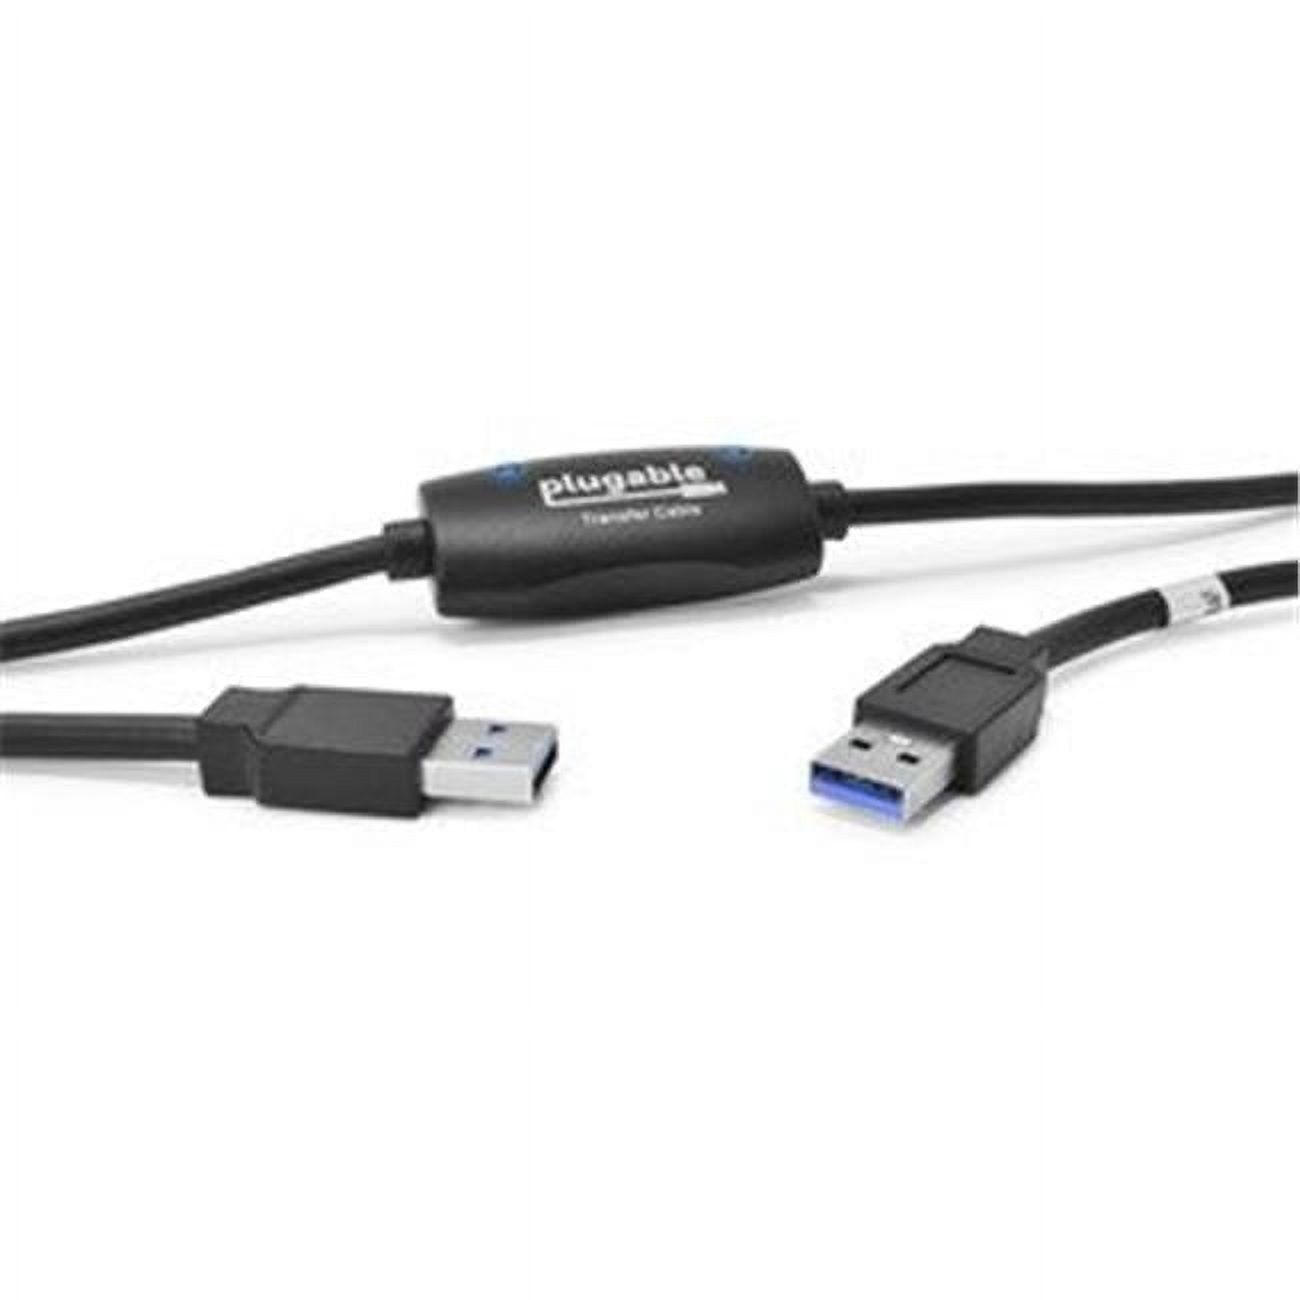 Plugable USB 3.0 Transfer Cable, Unlimited Use, Transfer Data Between 2 Windows PC's, Compatible with Windows 11, 10, 8.1, 8, 7, Vista, XP, Bravura Easy Computer Sync Software Included - image 1 of 5